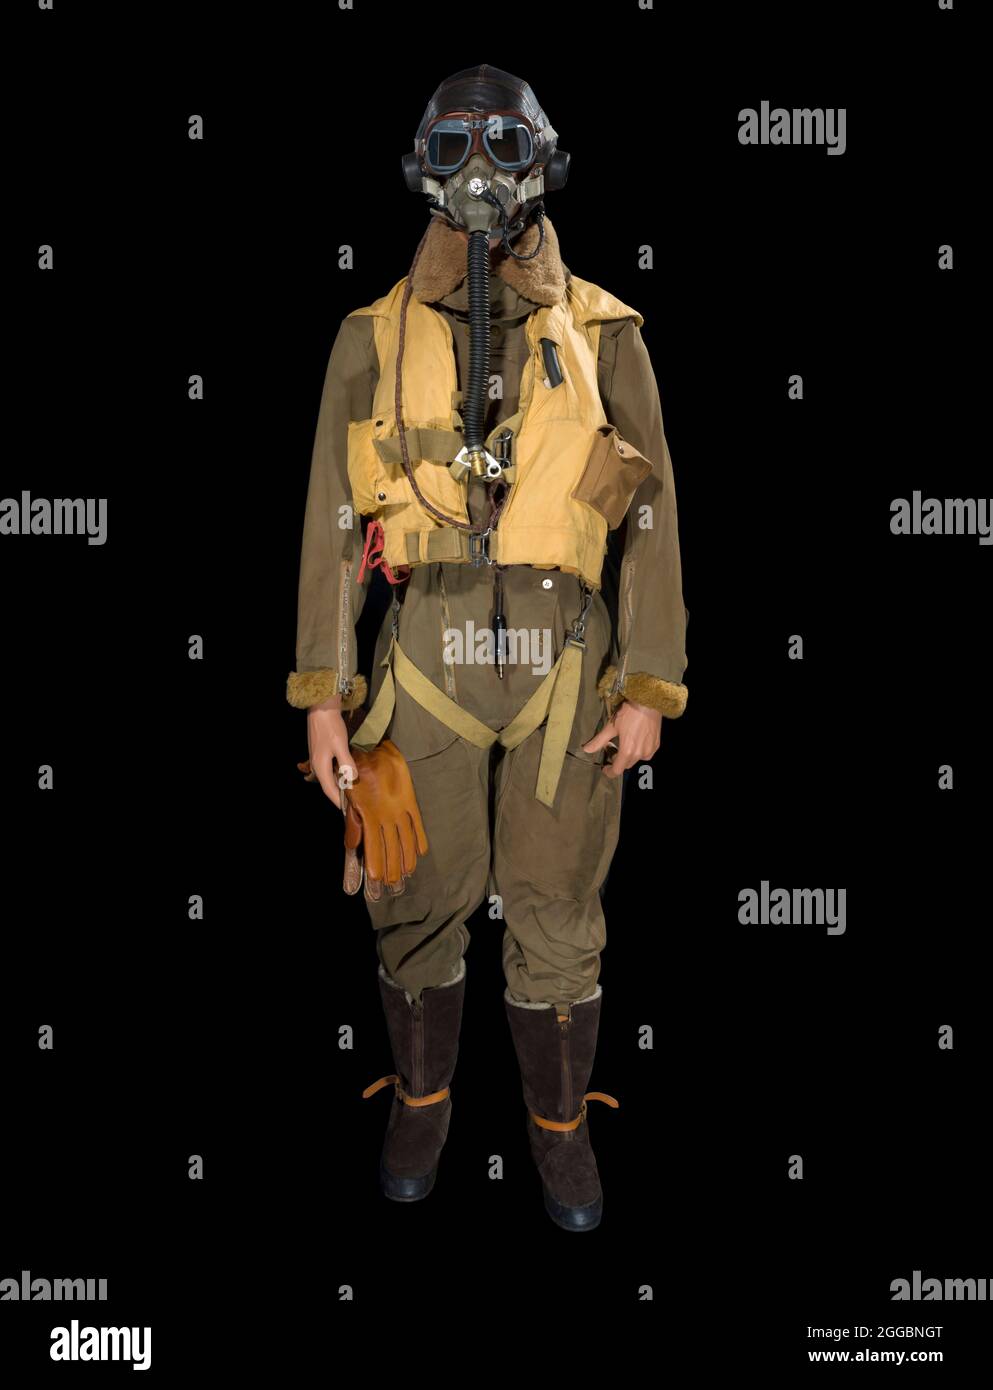 RAF flying suit, 1940s. One-piece &quot;Sidcot&quot; flying suit 1940  Pattern, worn by pilots in Britain's Royal Air Force during World War II.  The suit is a redevelopment of the original Sidcot suit